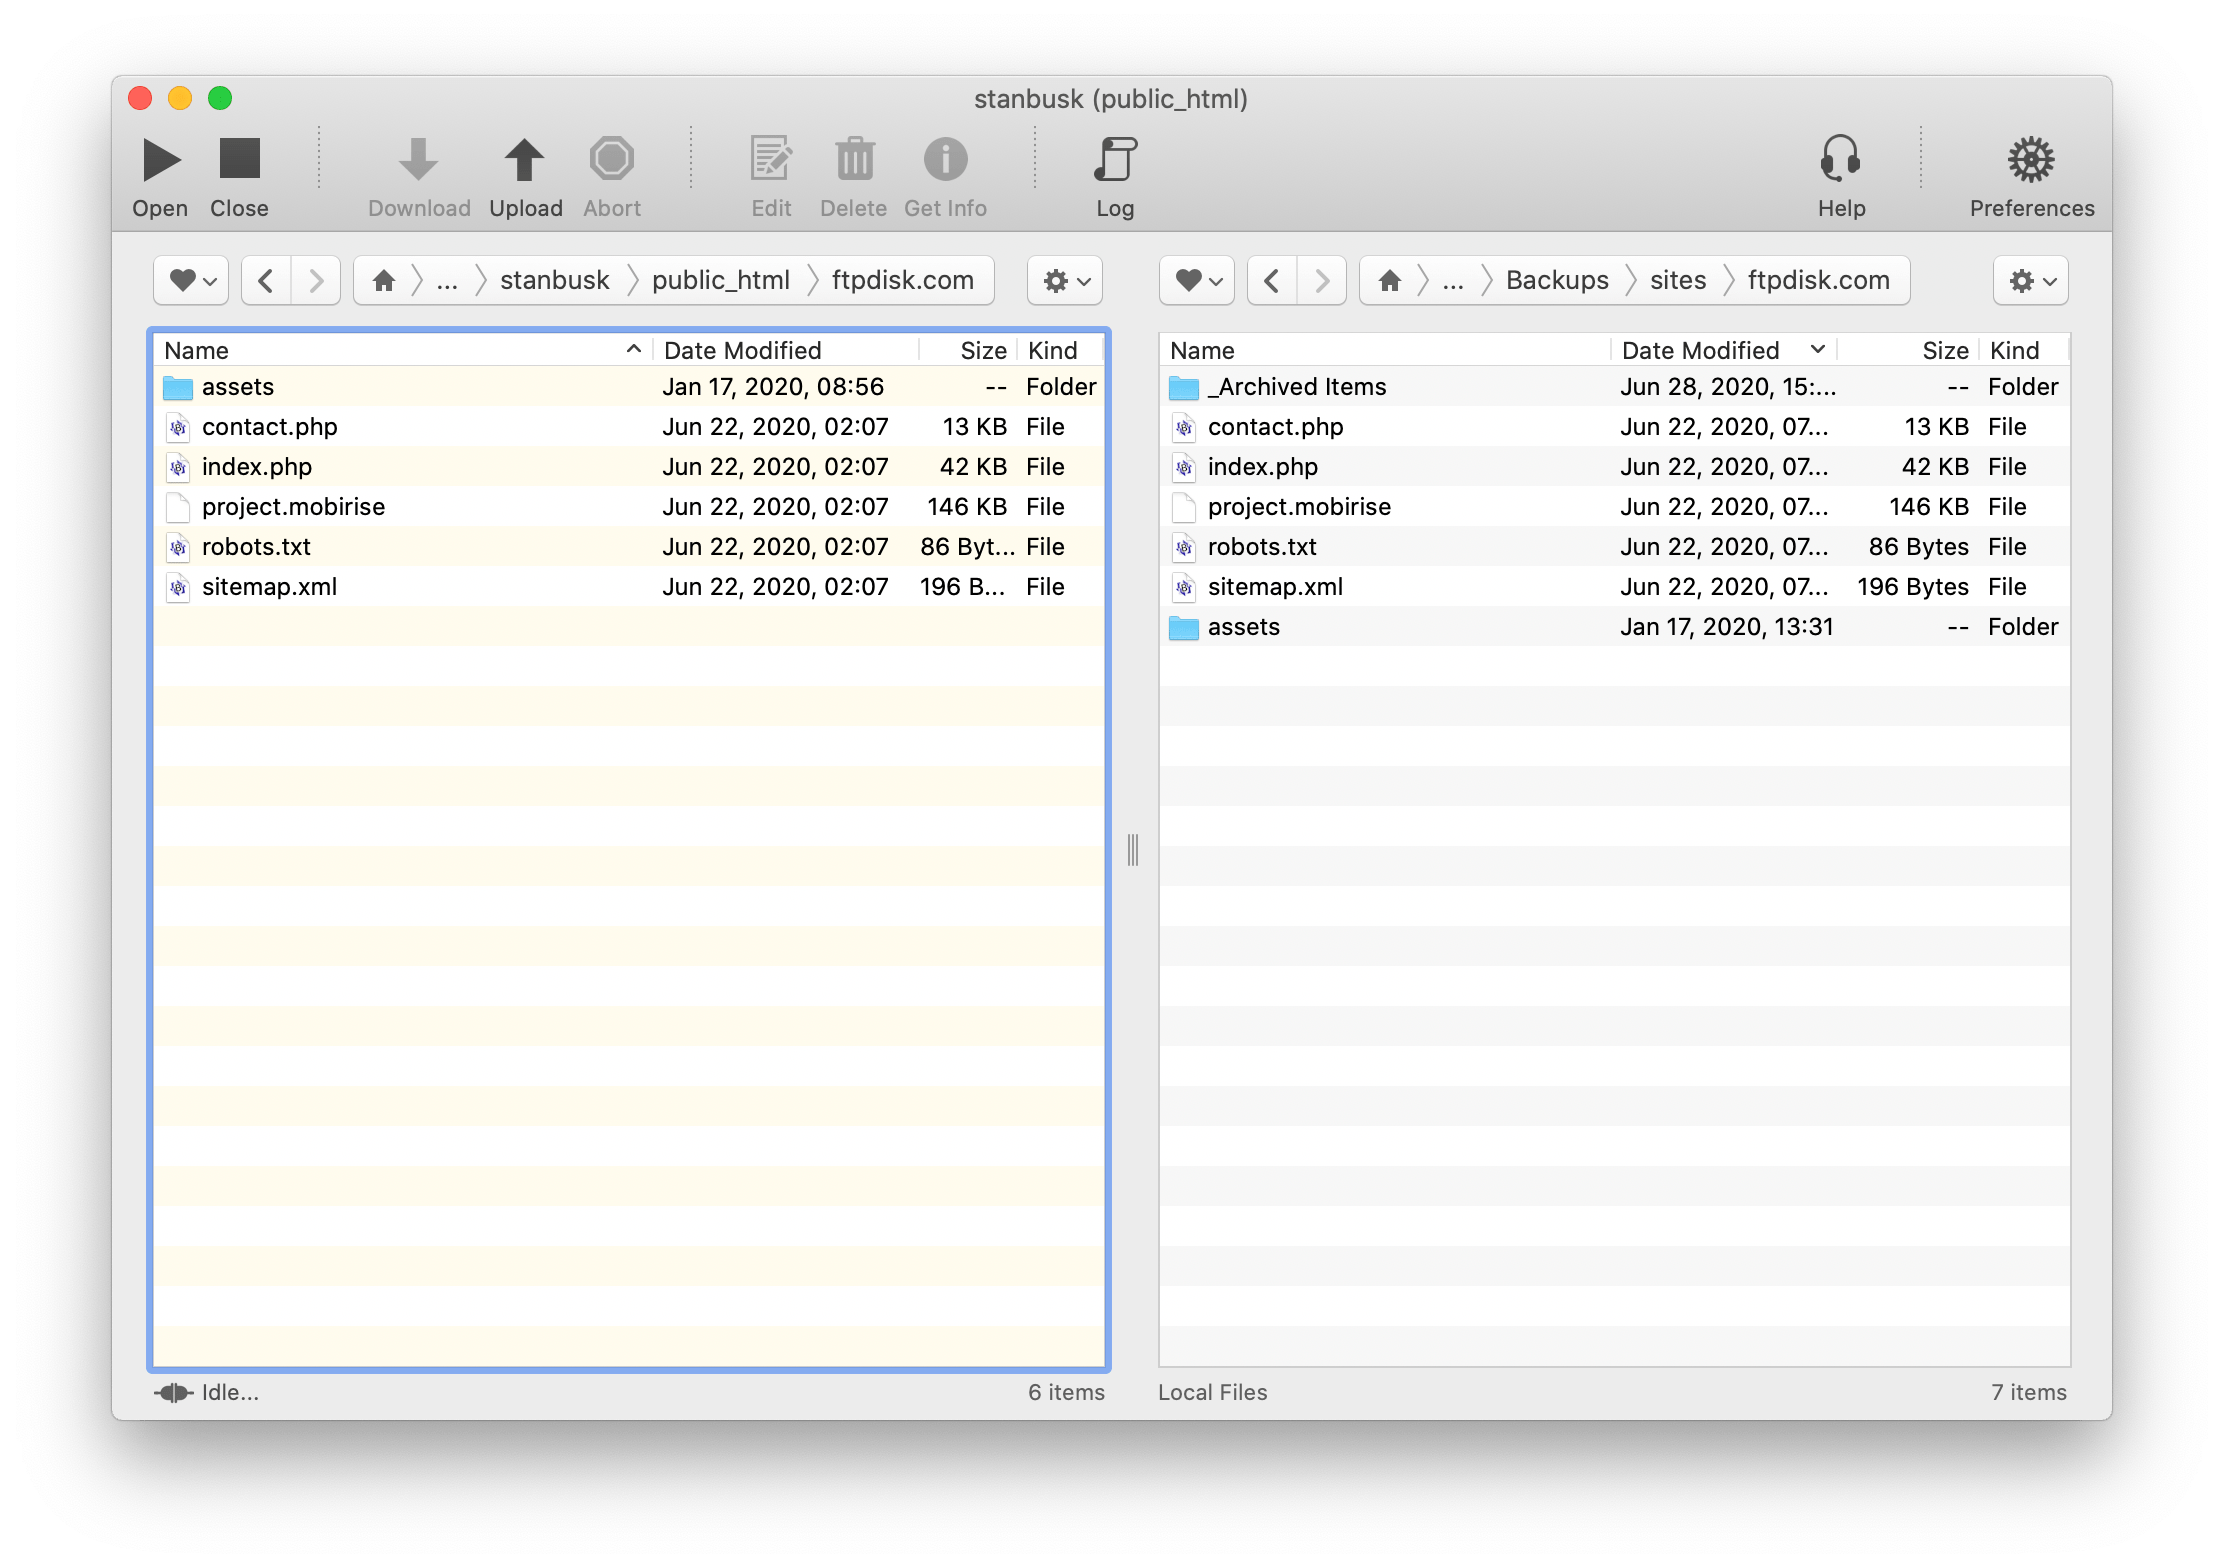 ftp disk